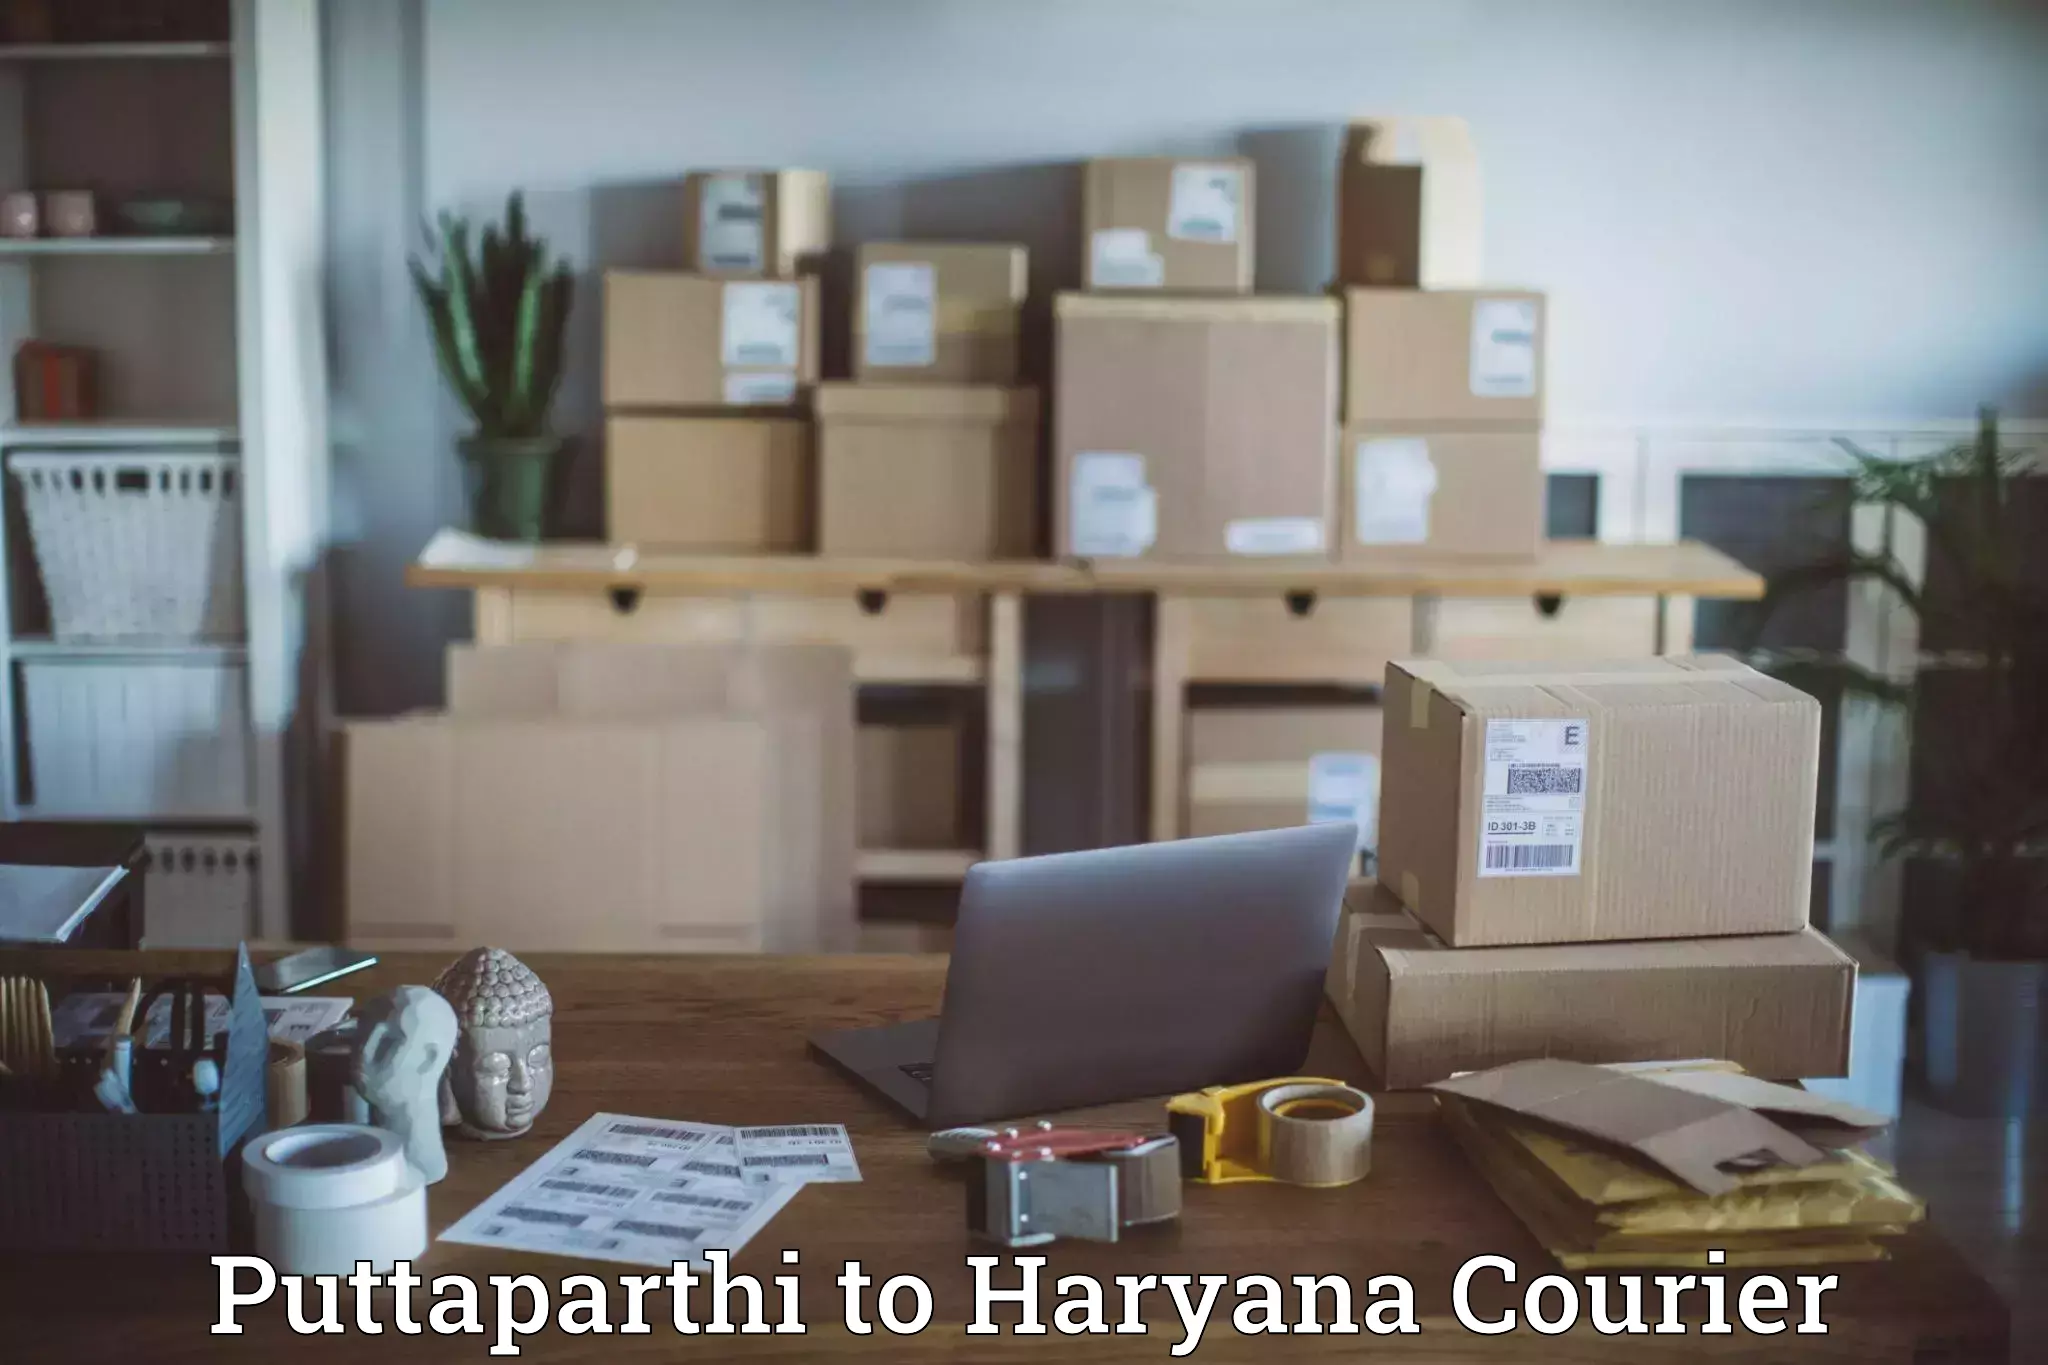 Full-service courier options in Puttaparthi to Bilaspur Haryana